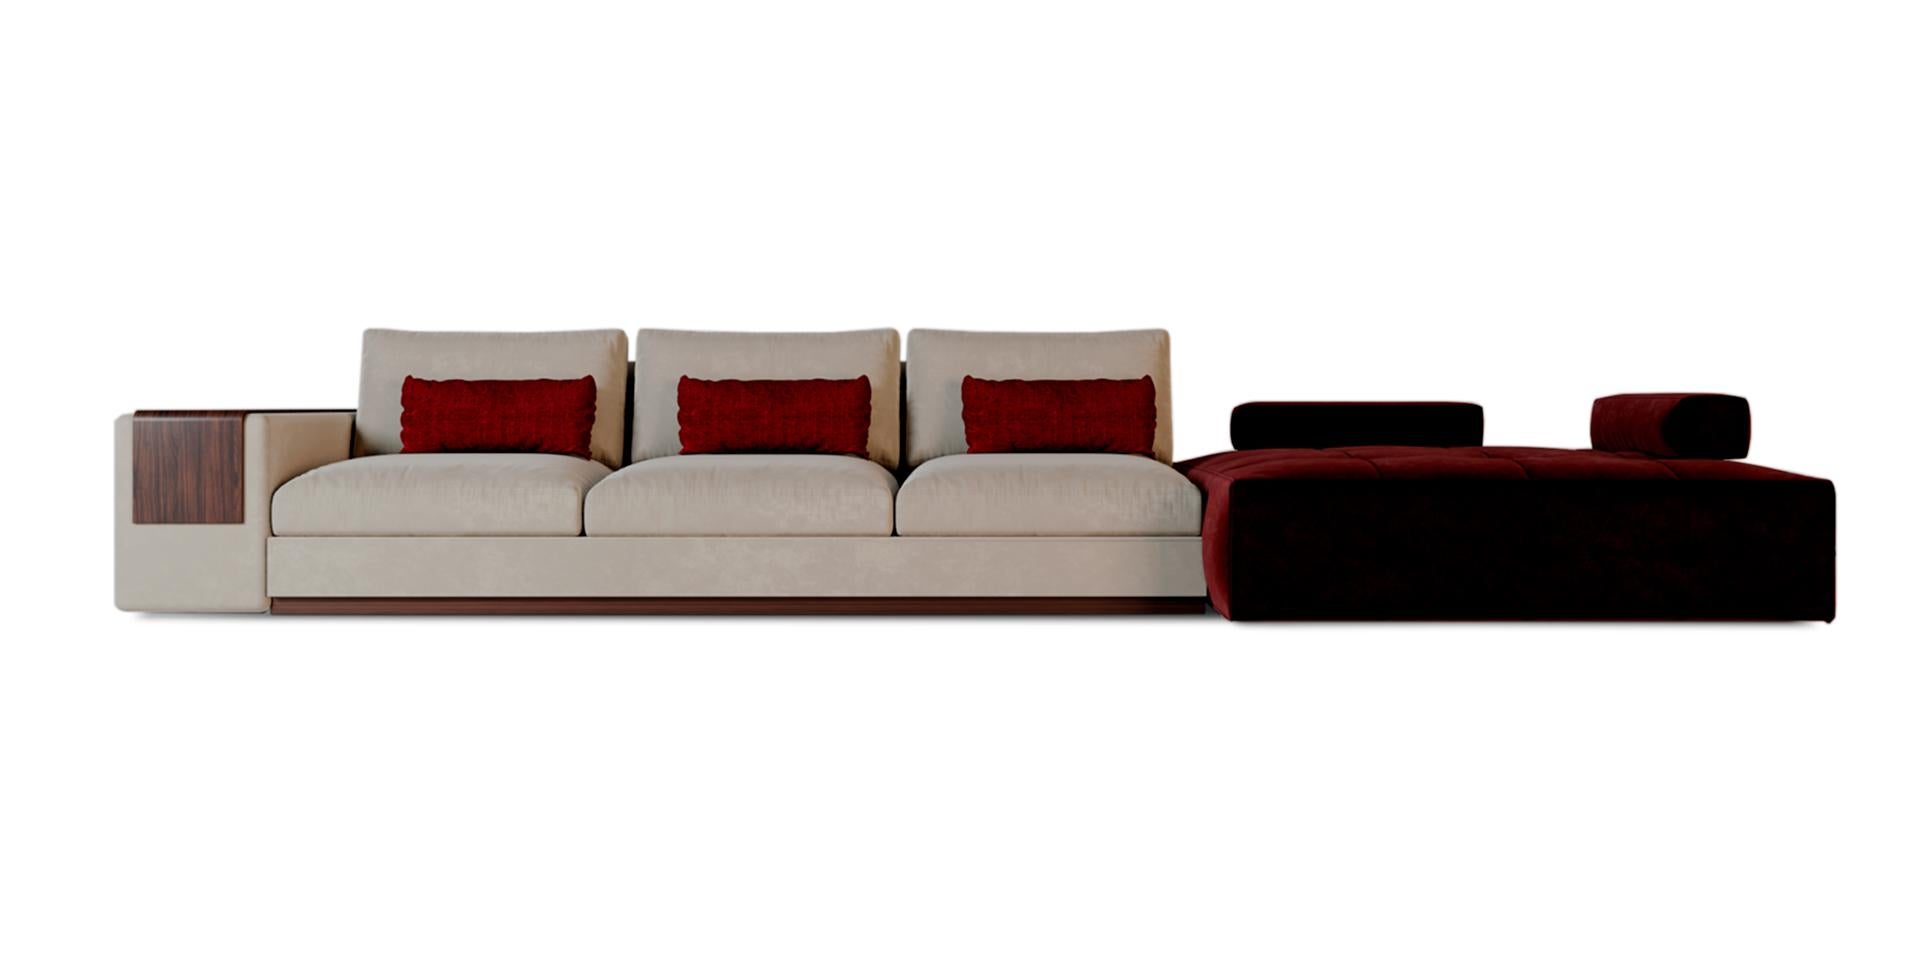 The Mies Sofa refers to the minimalist design of Mies van der Rohe's architecture. As in architecture where the design of spaces had a deep purification of form, in a rational approach, beauty emerged in the technical precision of functionality. Was